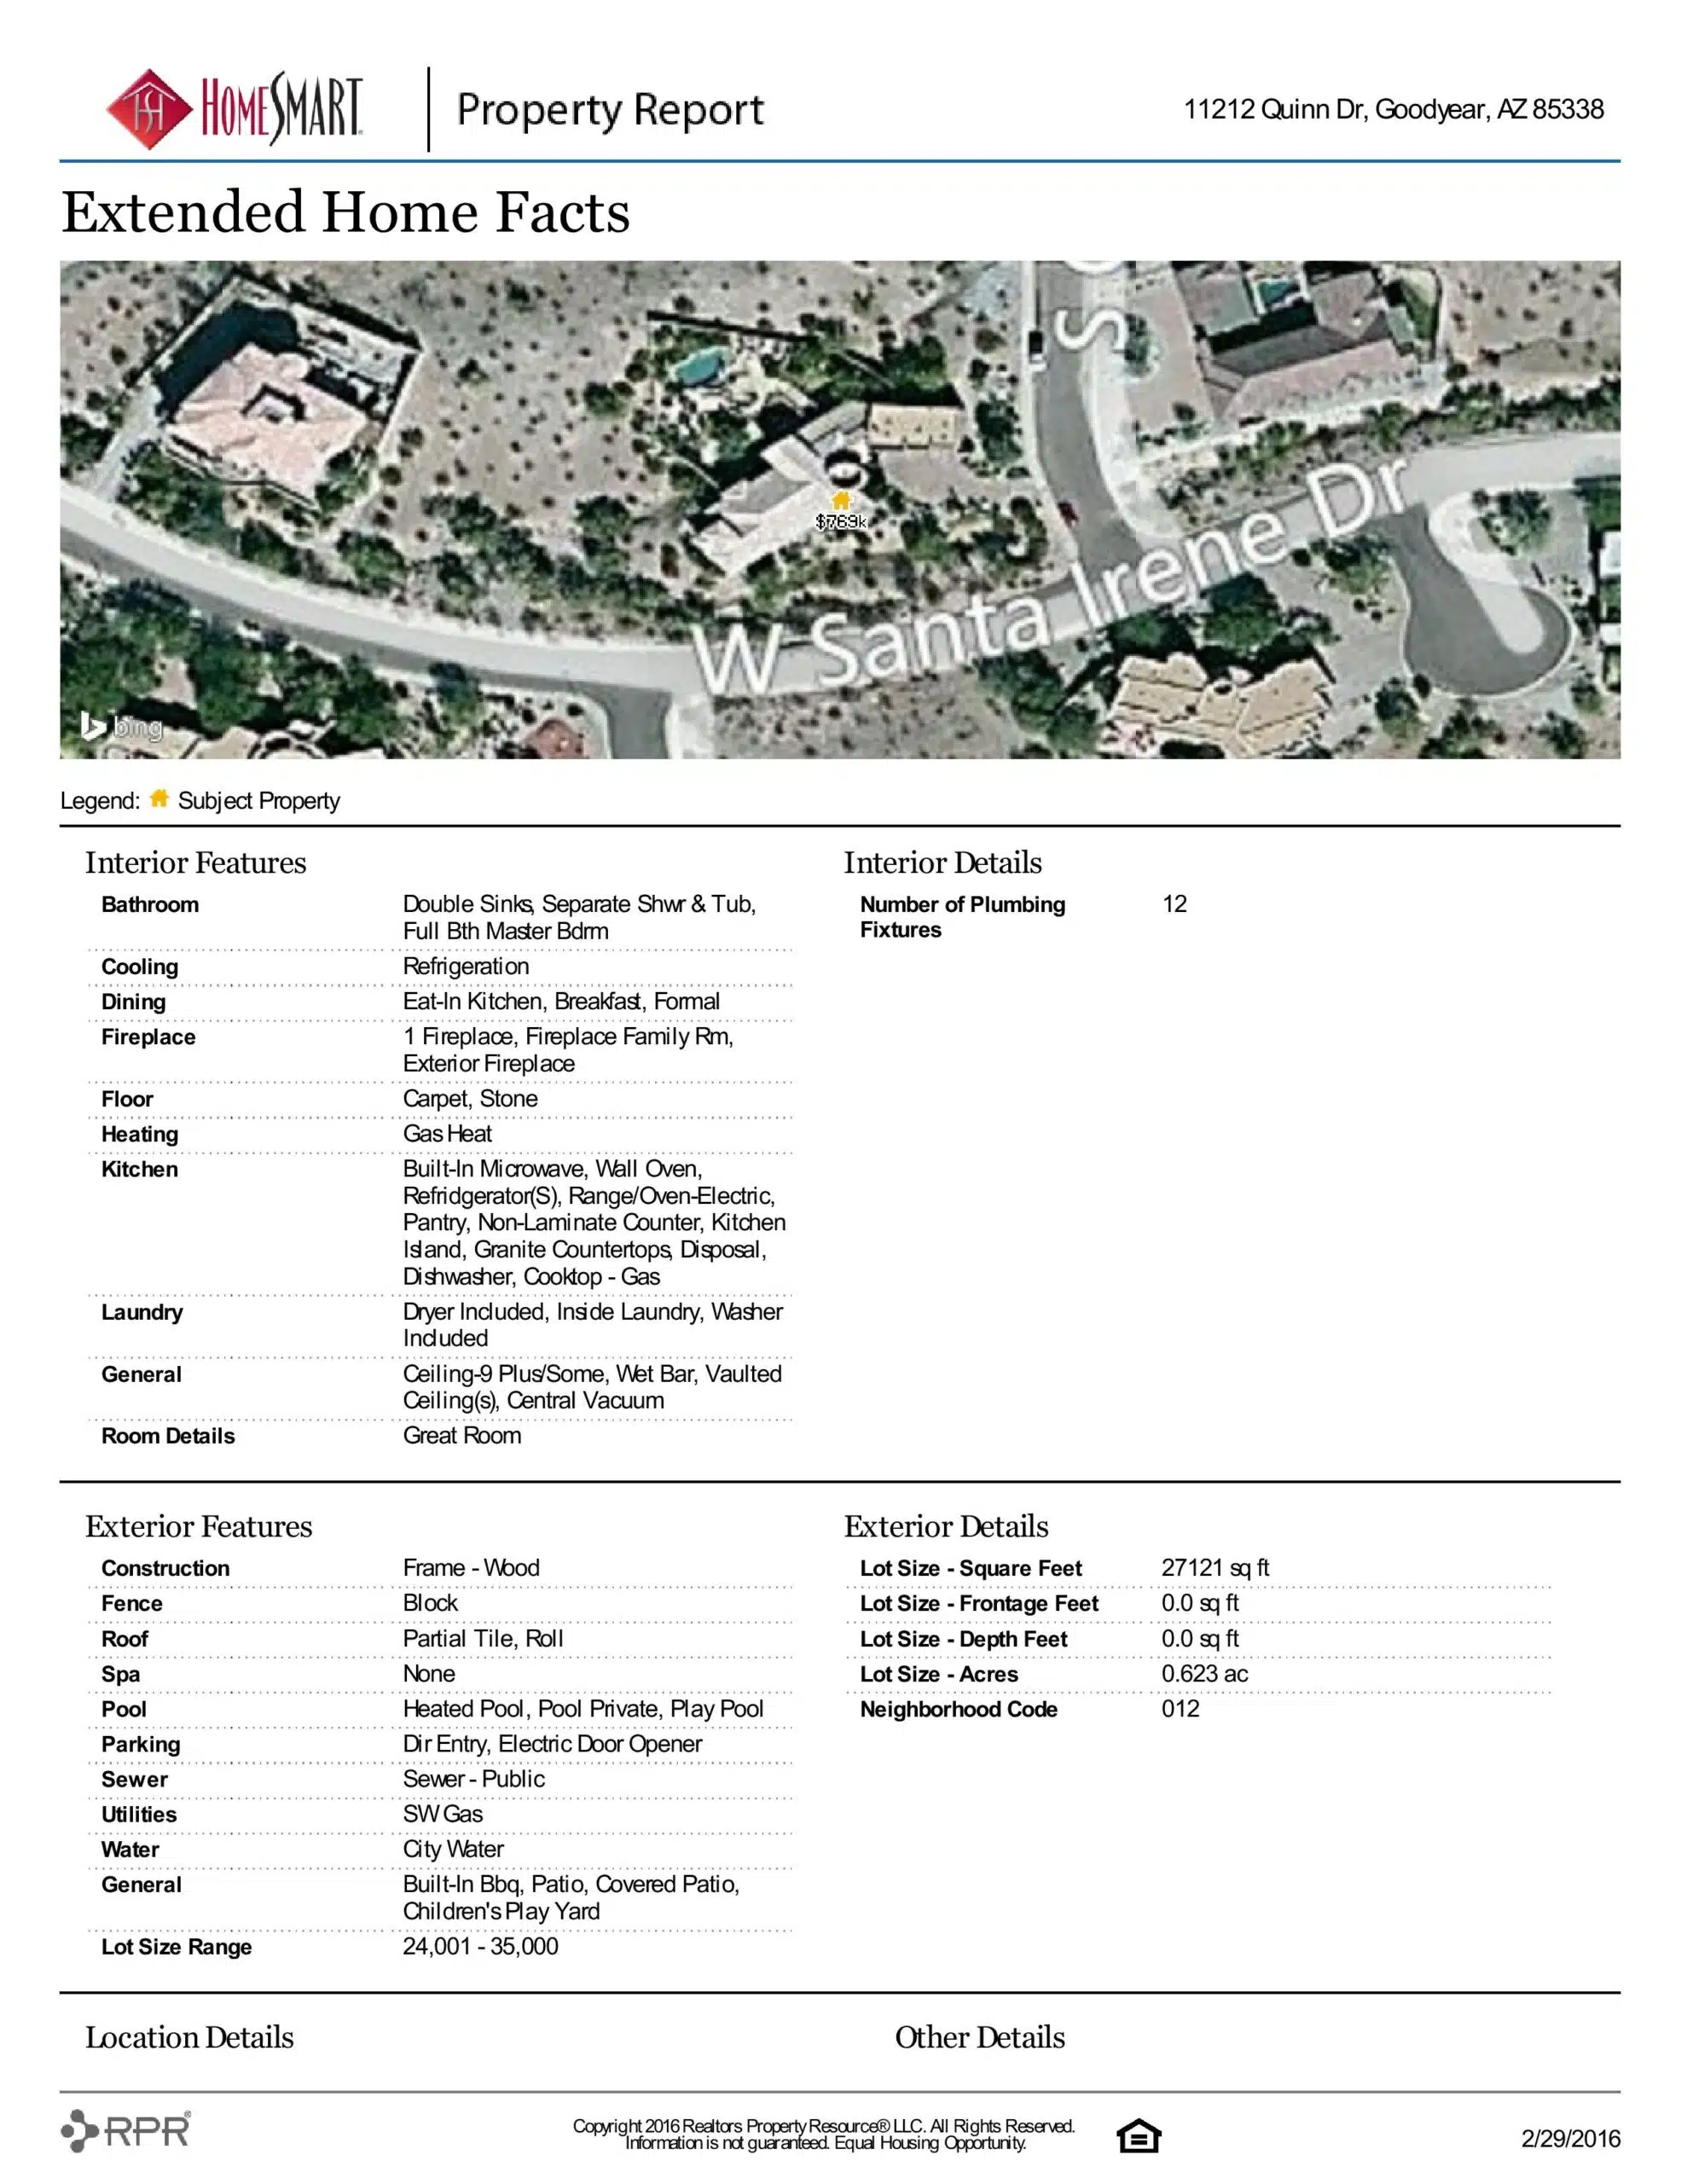 11212 S QUINN DR PROPERTY REPORT-page-004